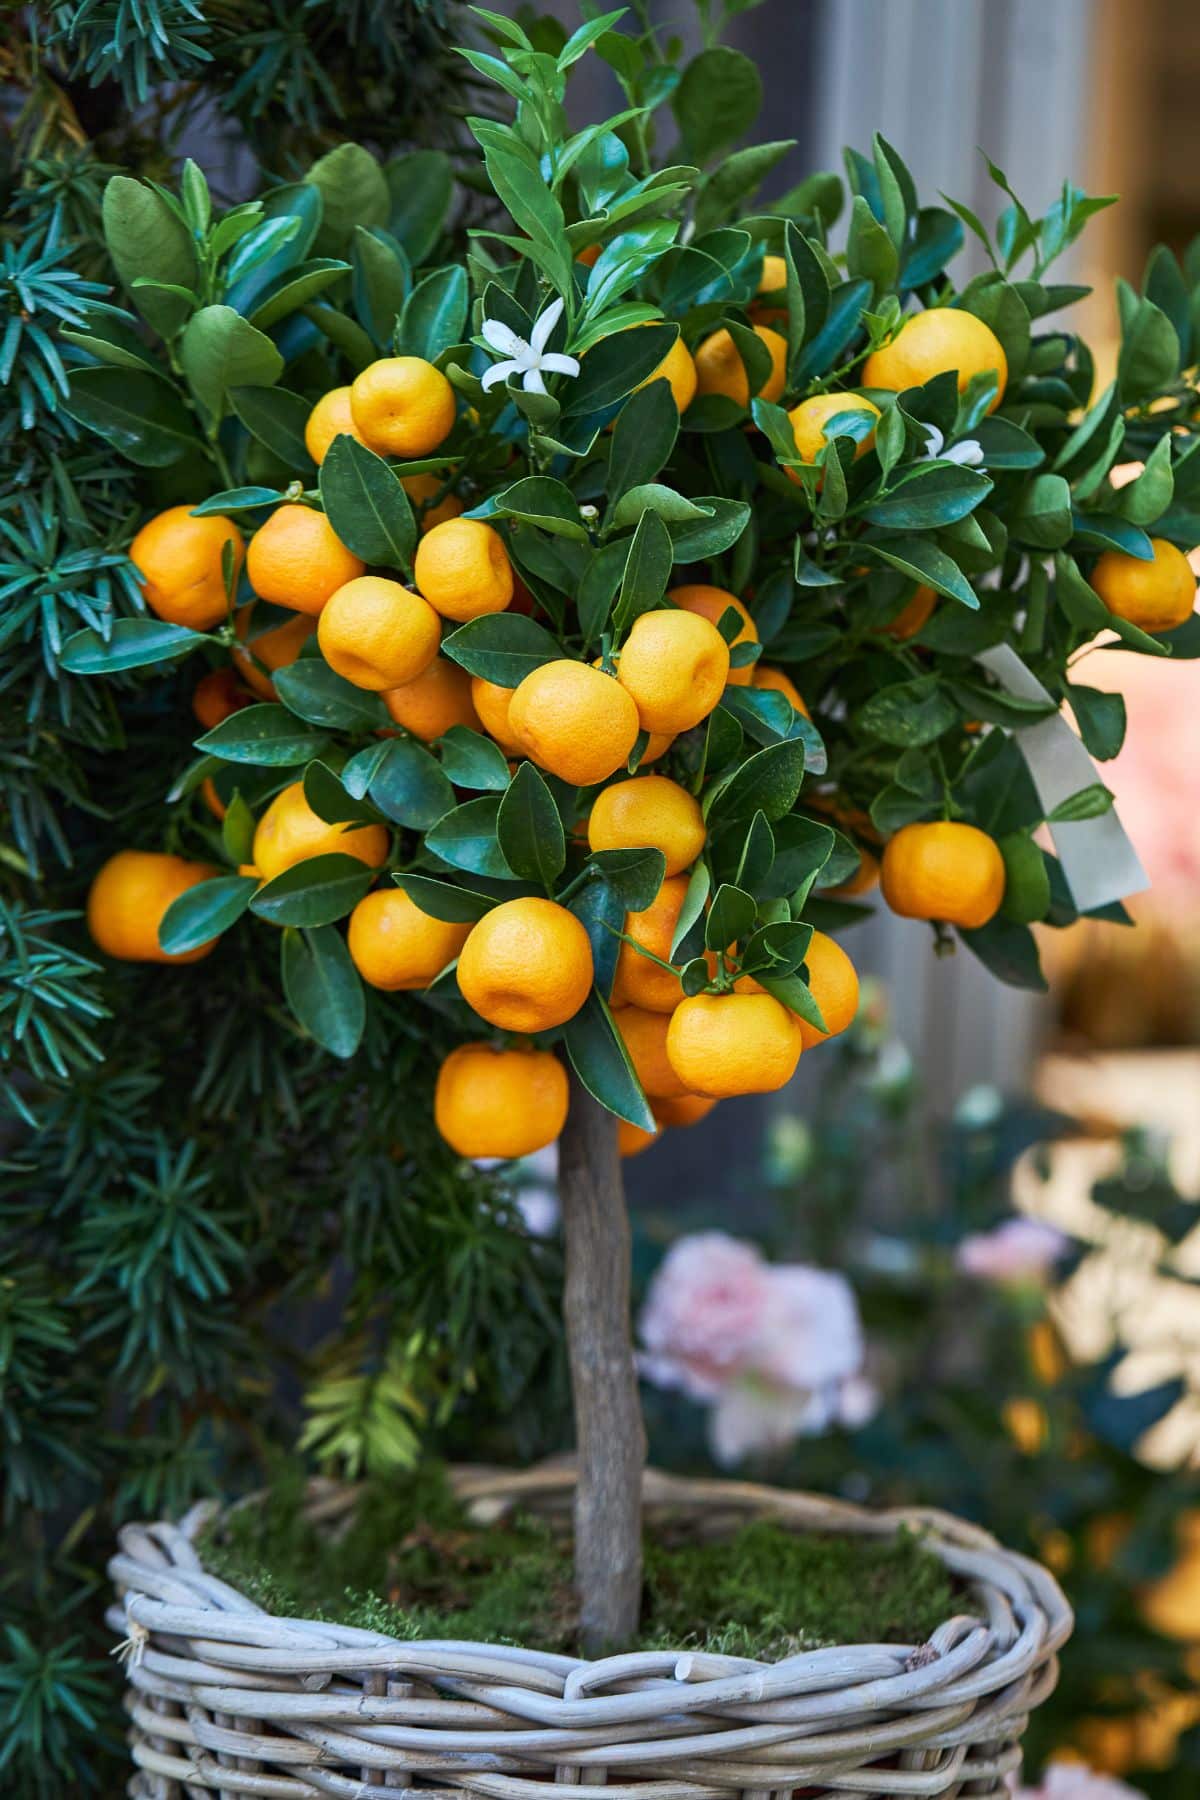 Citrus Tree with ripe fruits growing in a basket.